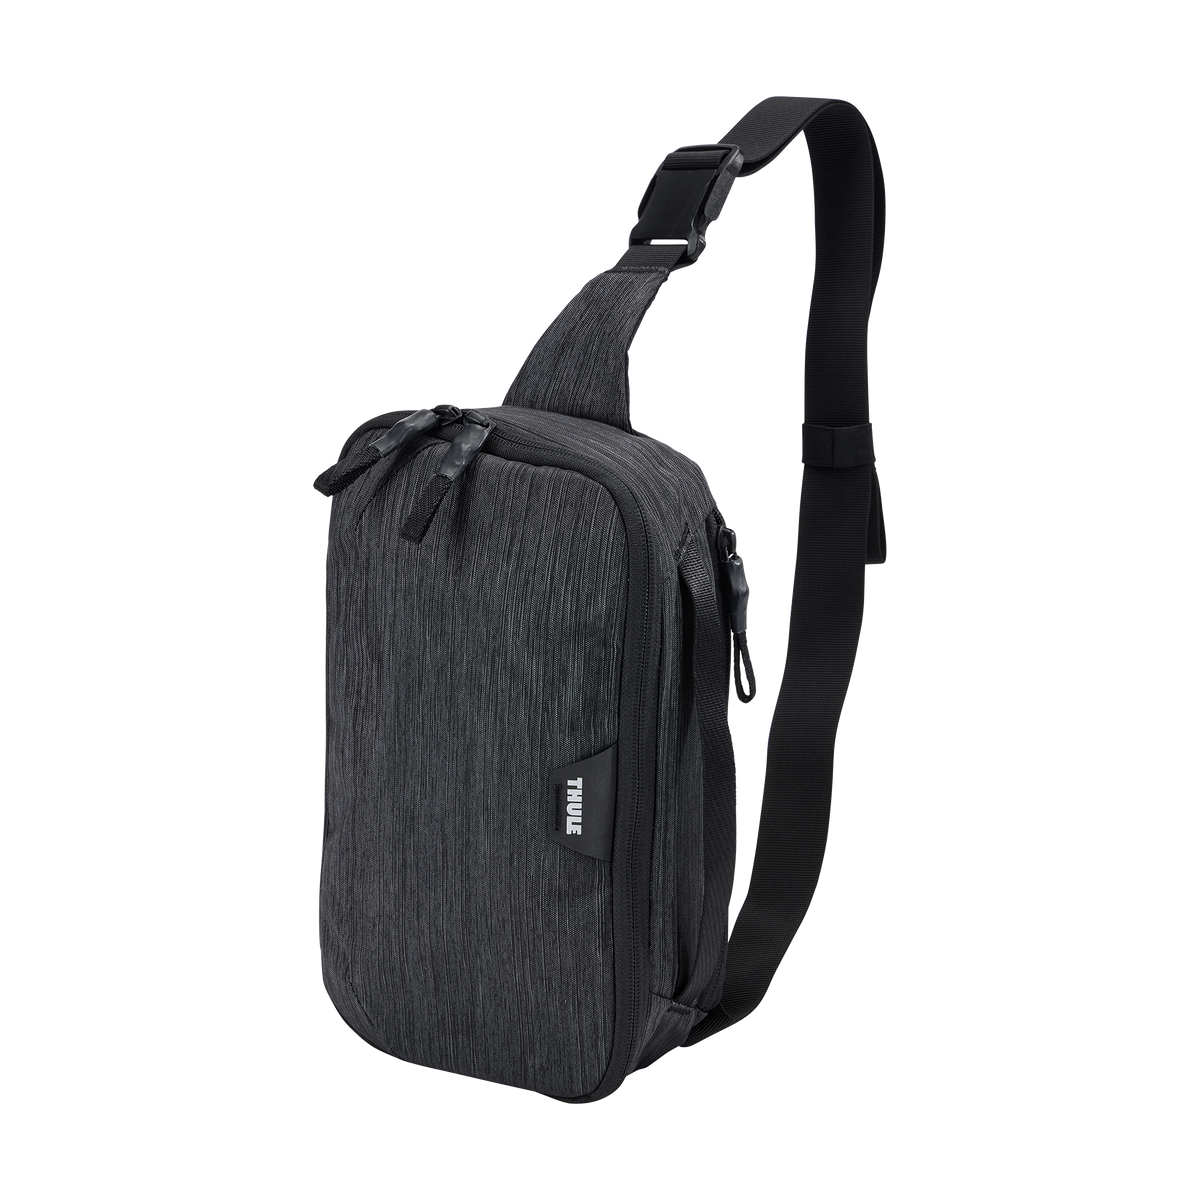 Thule Changing Backpack Black